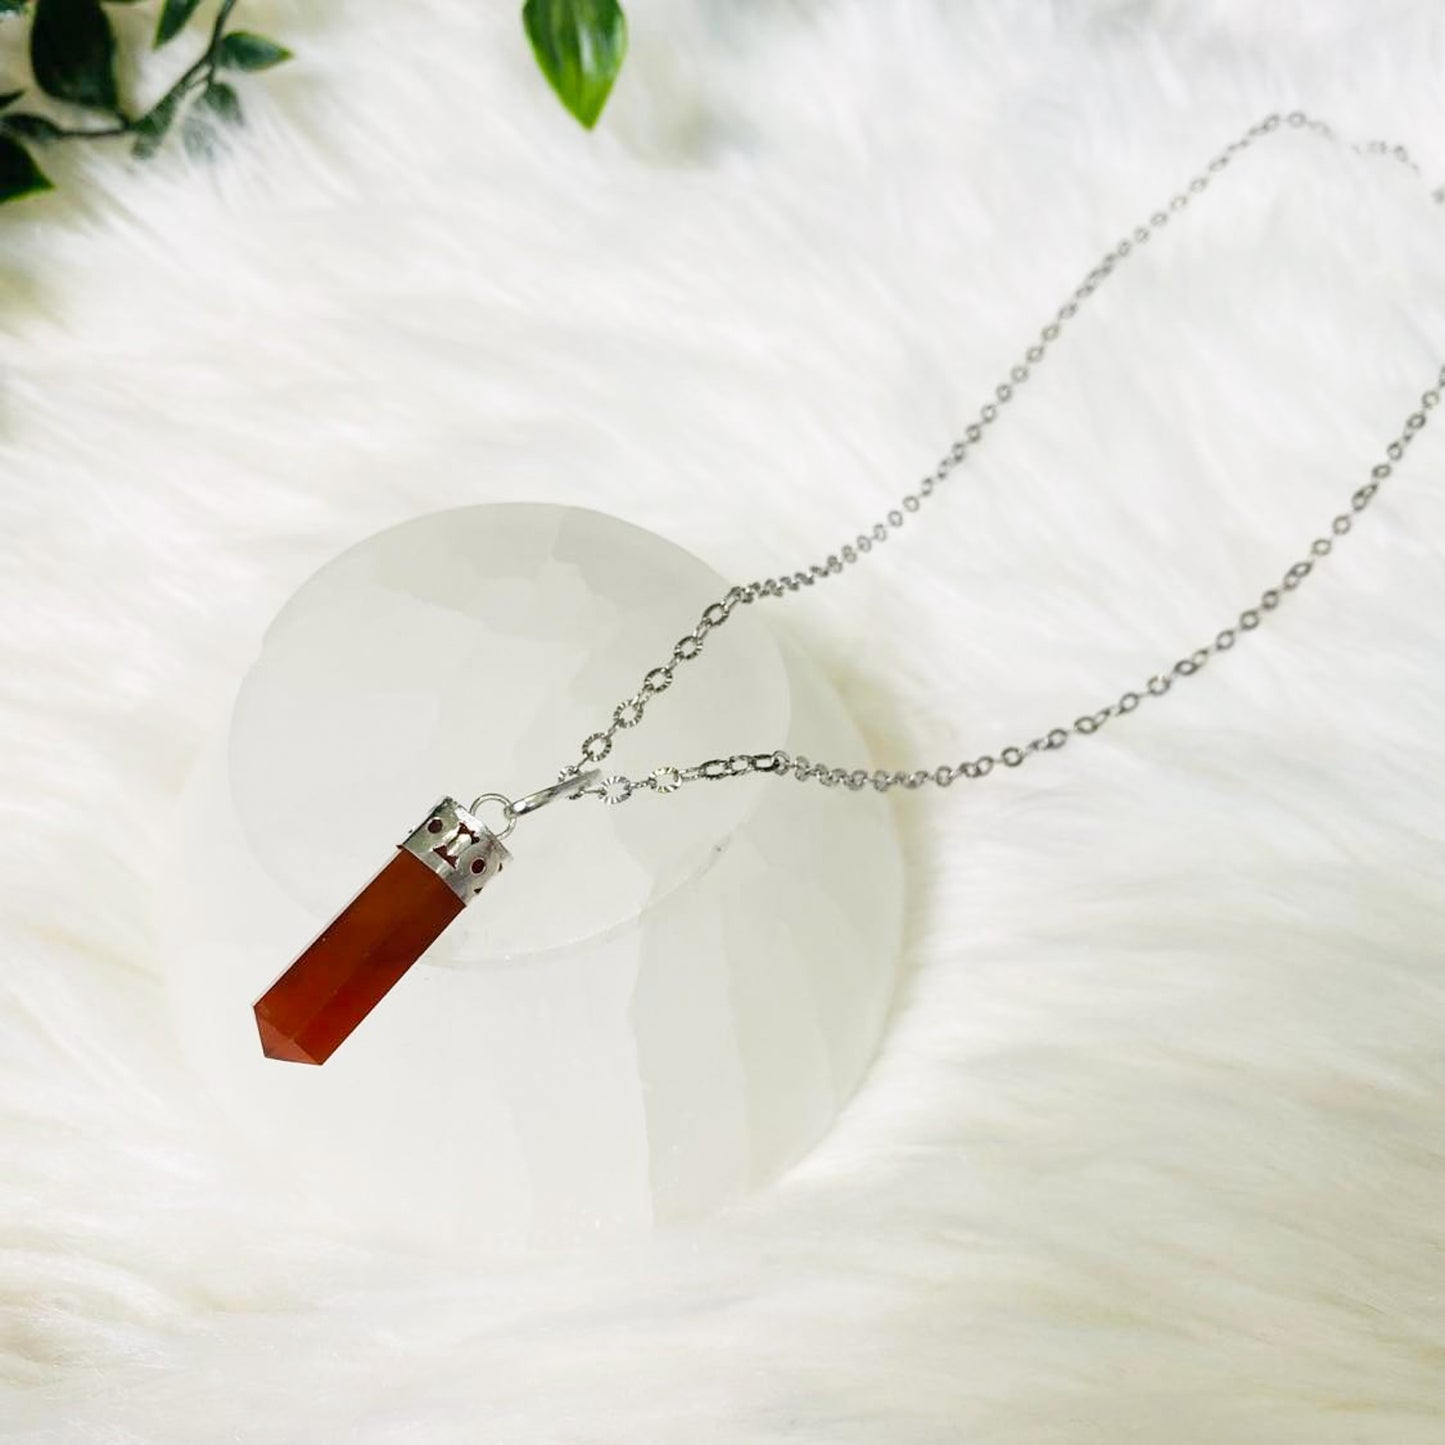 Carnelian Pointed Crystal Necklace with 18k Gold Dipped Silver Chain